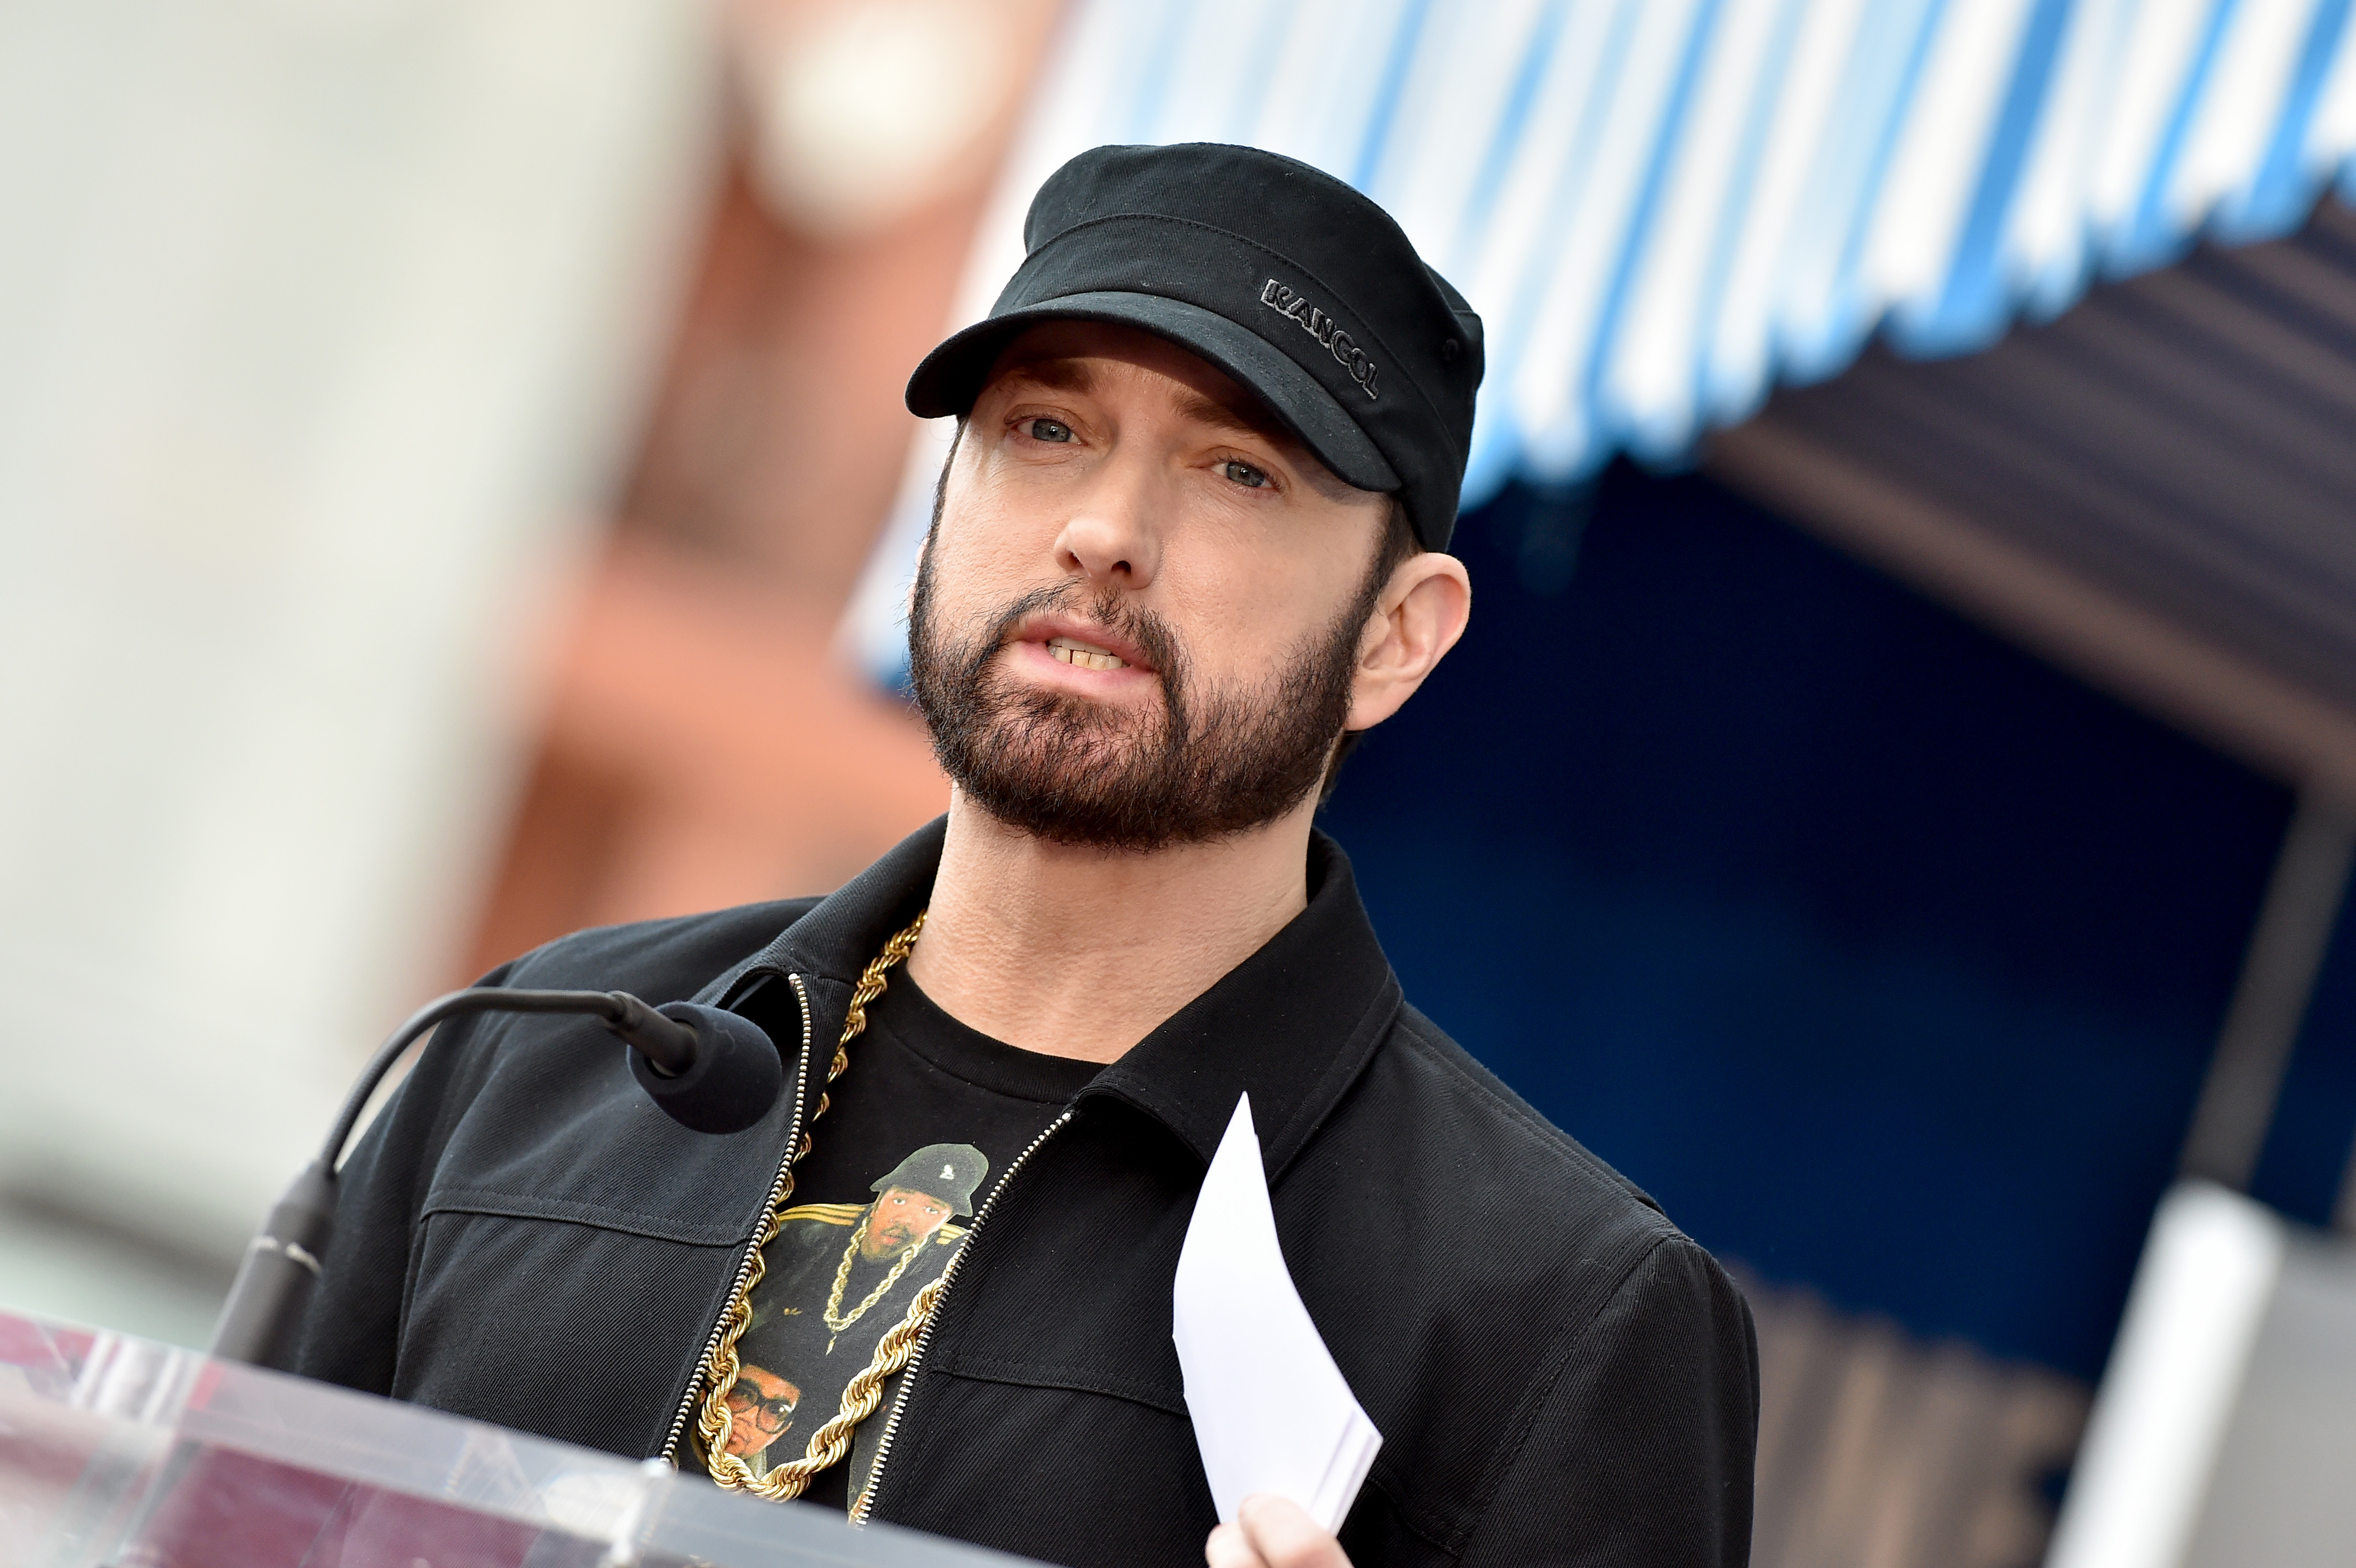 An insider claimed Eminem supports his daughter's relationship